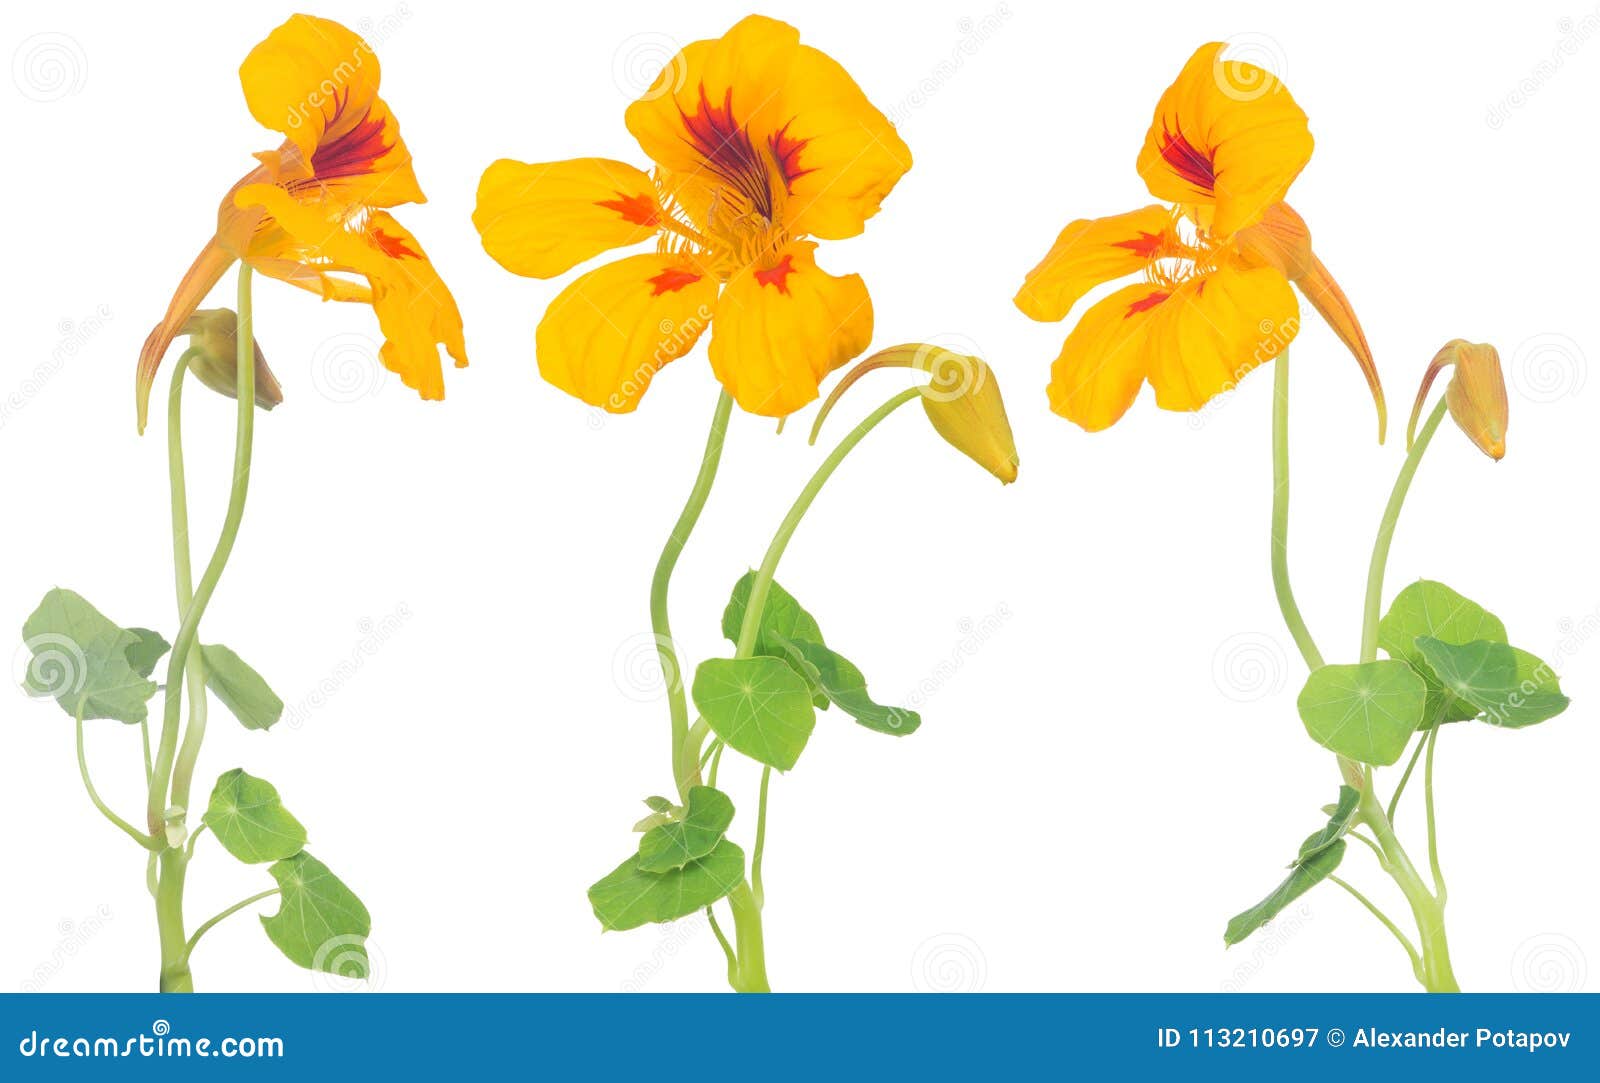 Yellow And Red Nasturtium Flowers With Bloom And Bud Stock Image Image Of White Petal 113210697